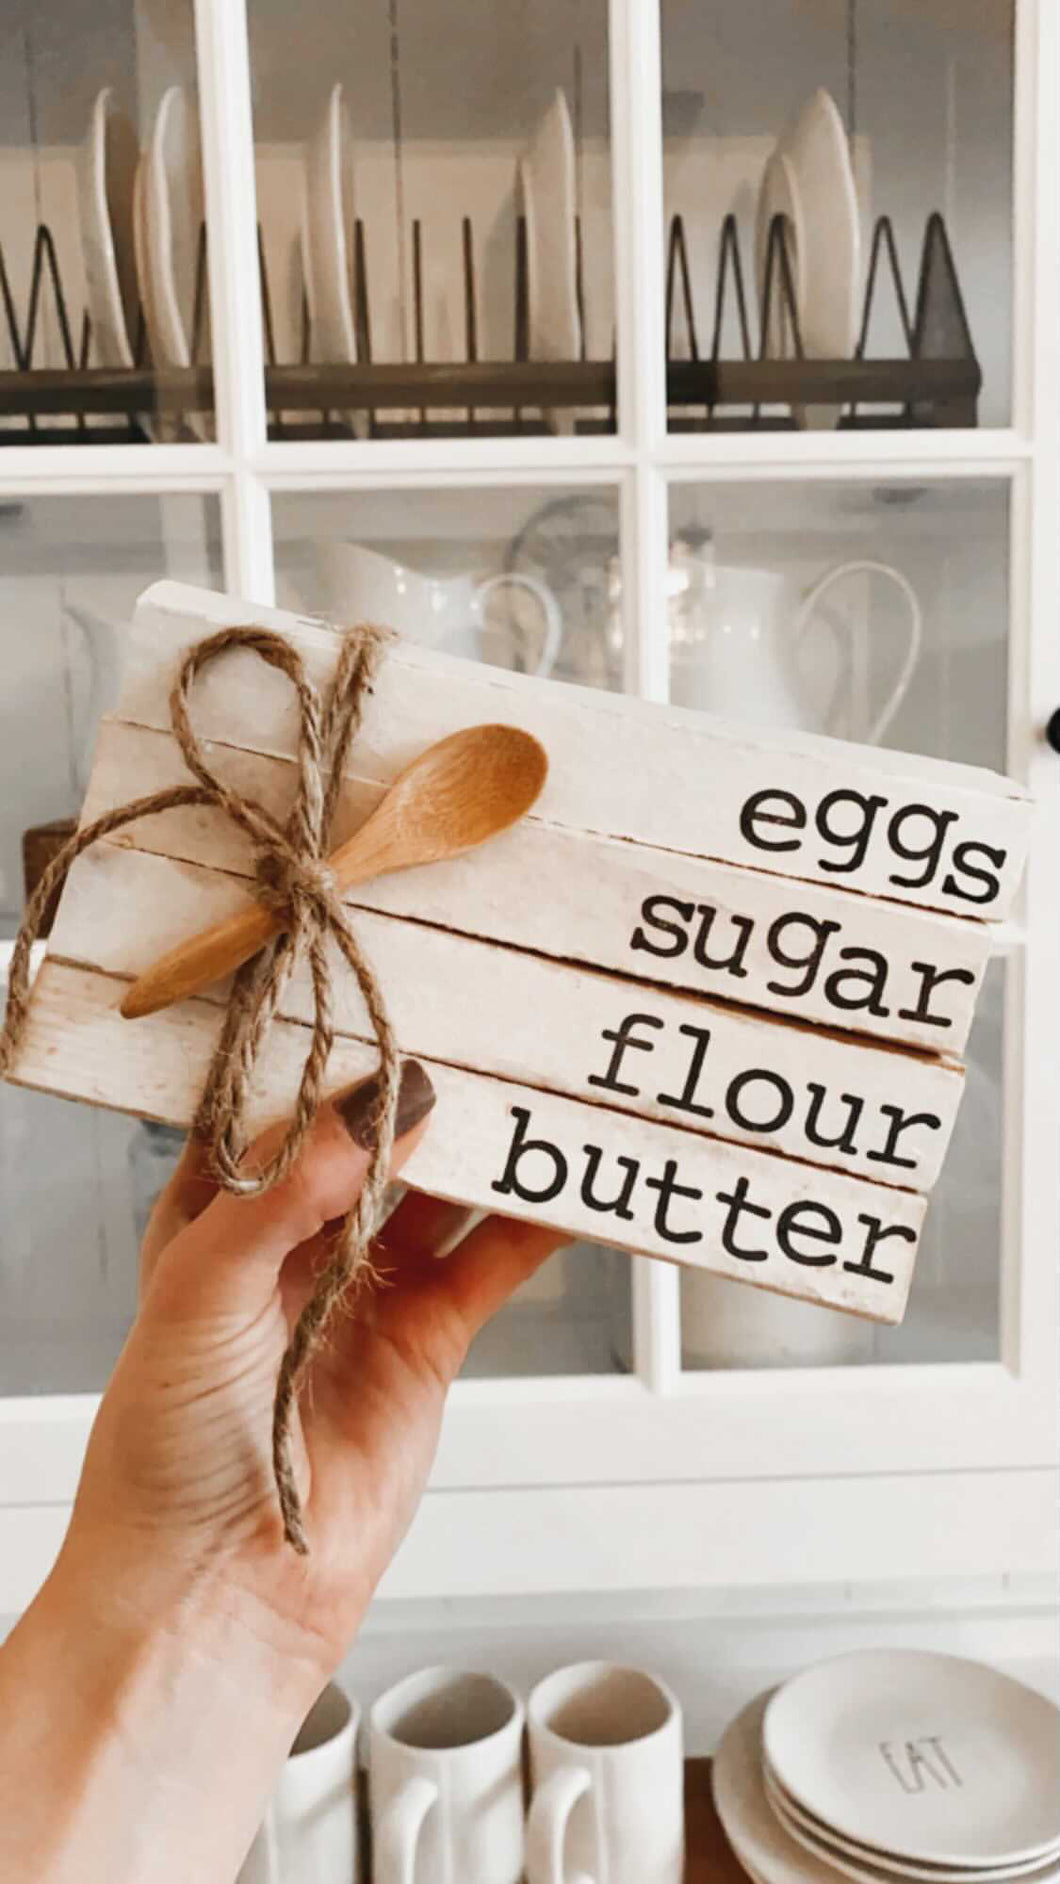 Stamped Book Stack - Eggs sugar flour butter